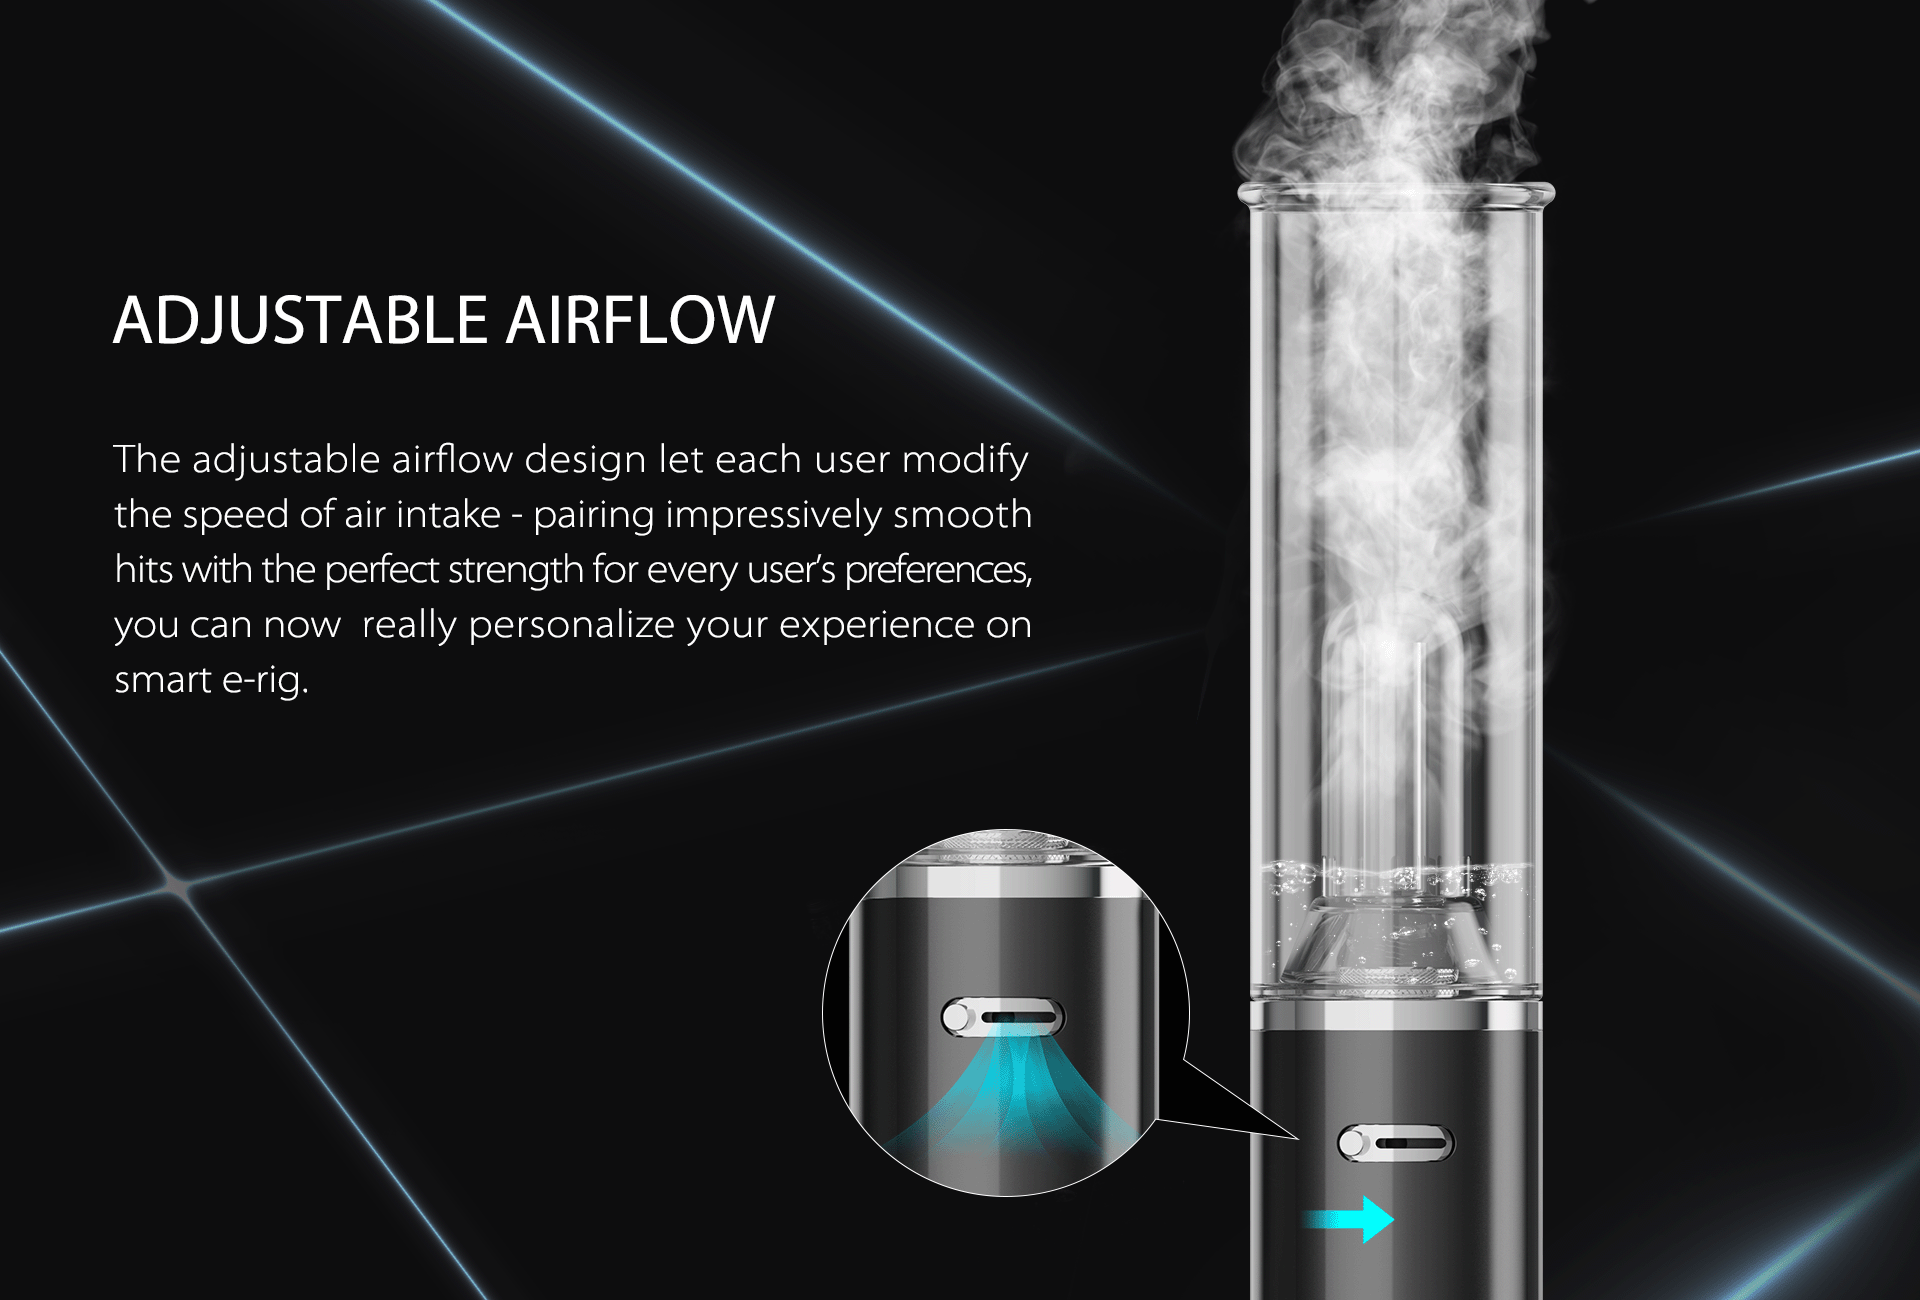 Yocan Pillar Erig comes with adjustable airflow design, let each user modify the speed of air intake